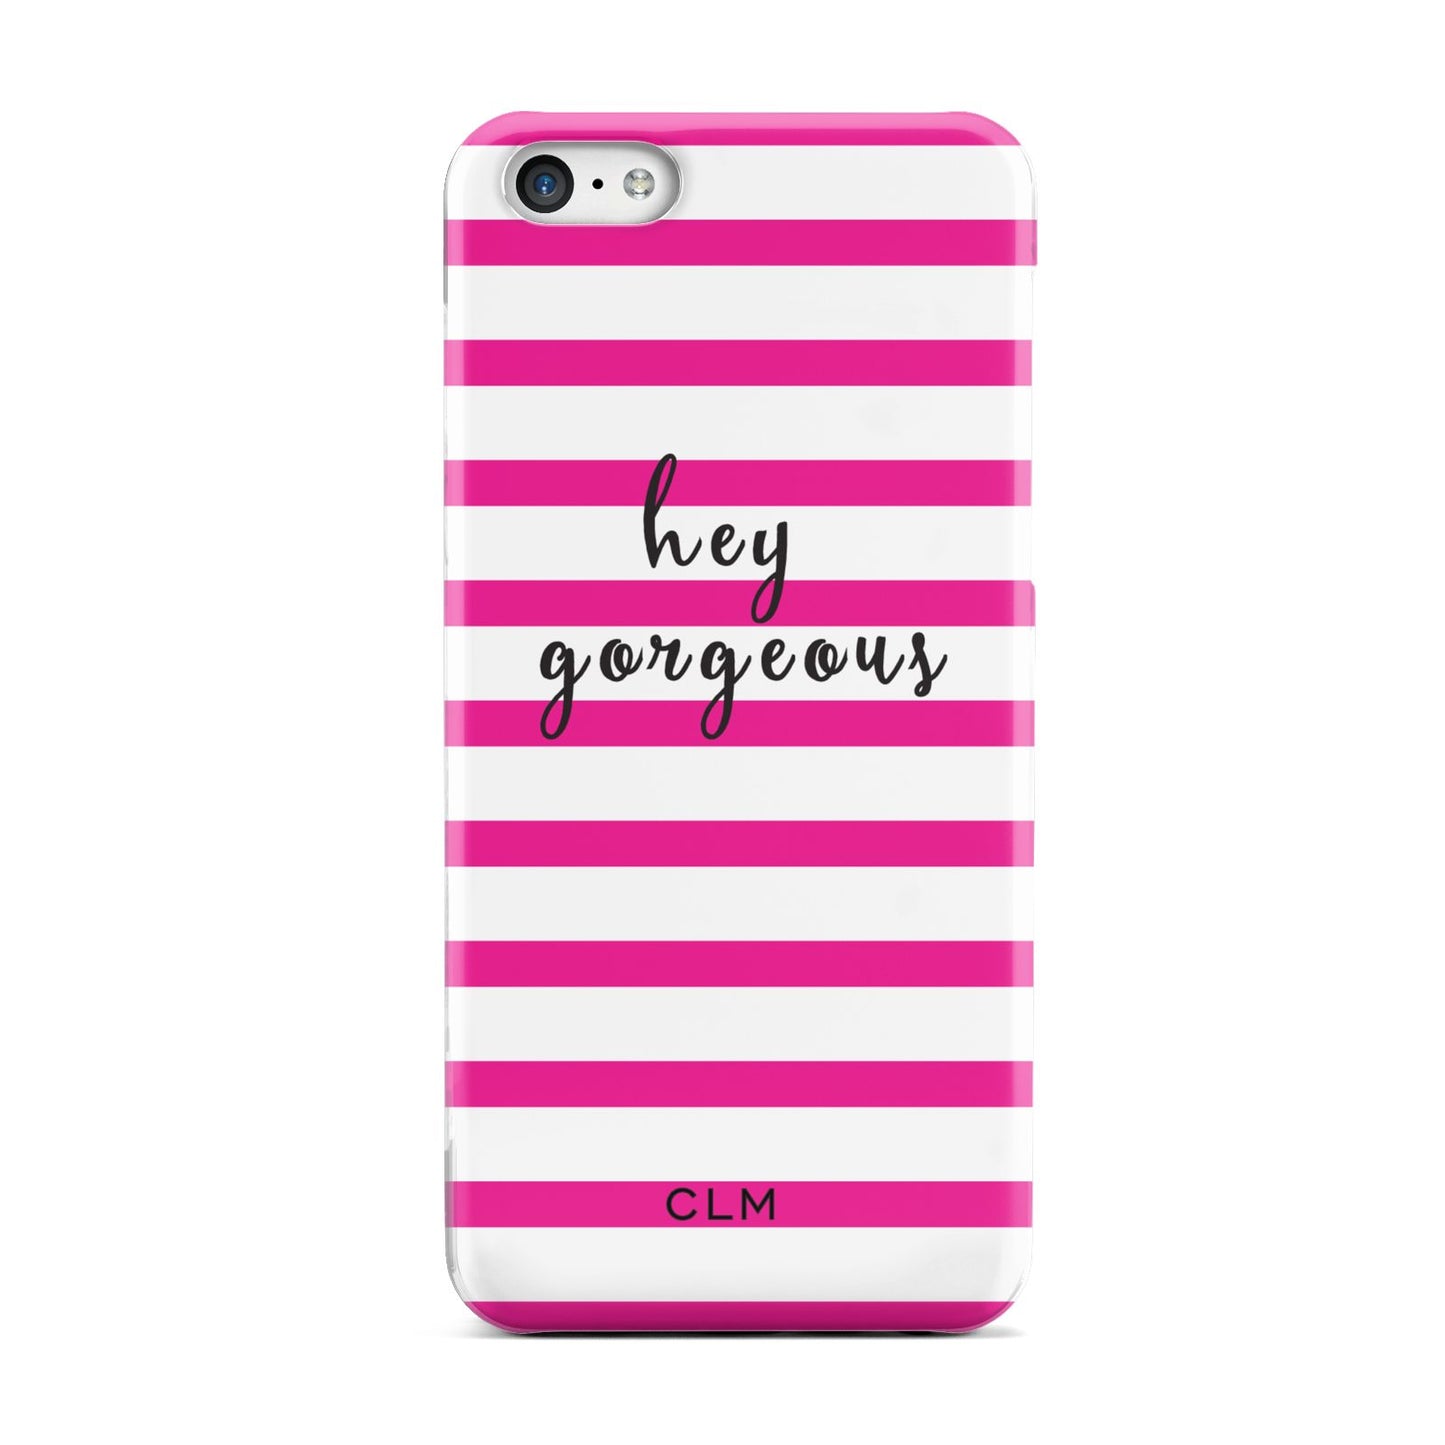 Personalised Initials Pink Striped Apple iPhone 5c Case